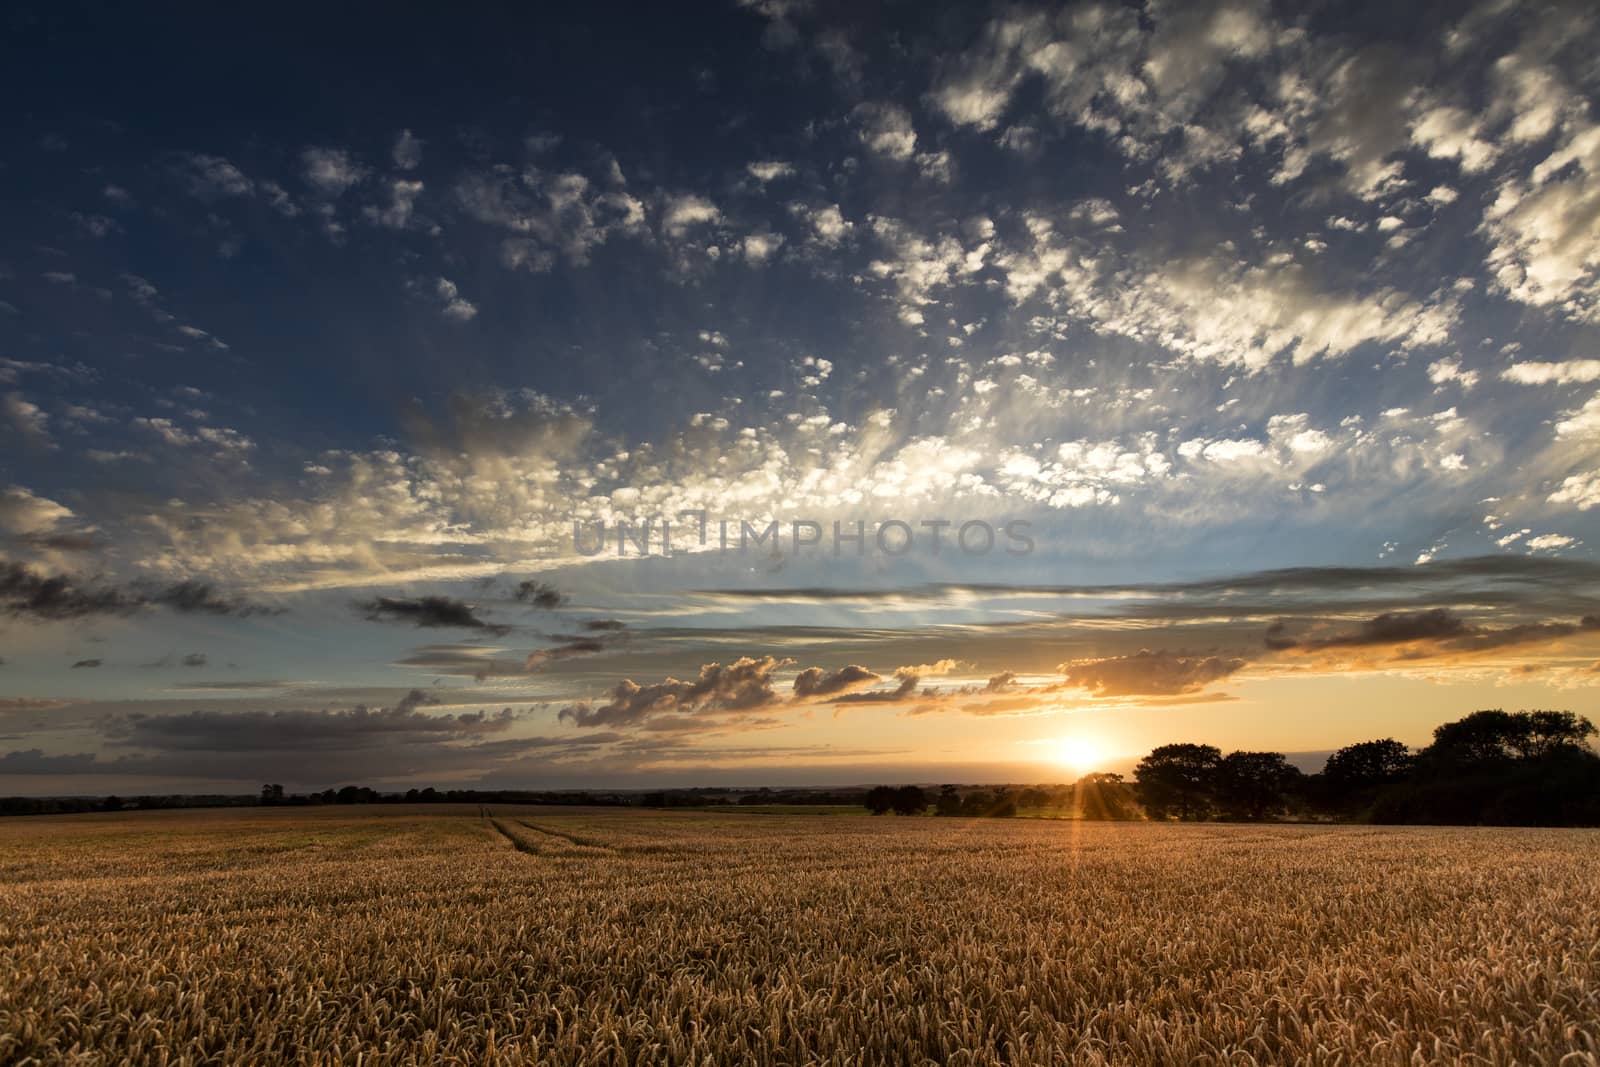 Near Caistor, Lincolnshire, UK, July 2017, View of Lincolnshire Wolds and a sunset